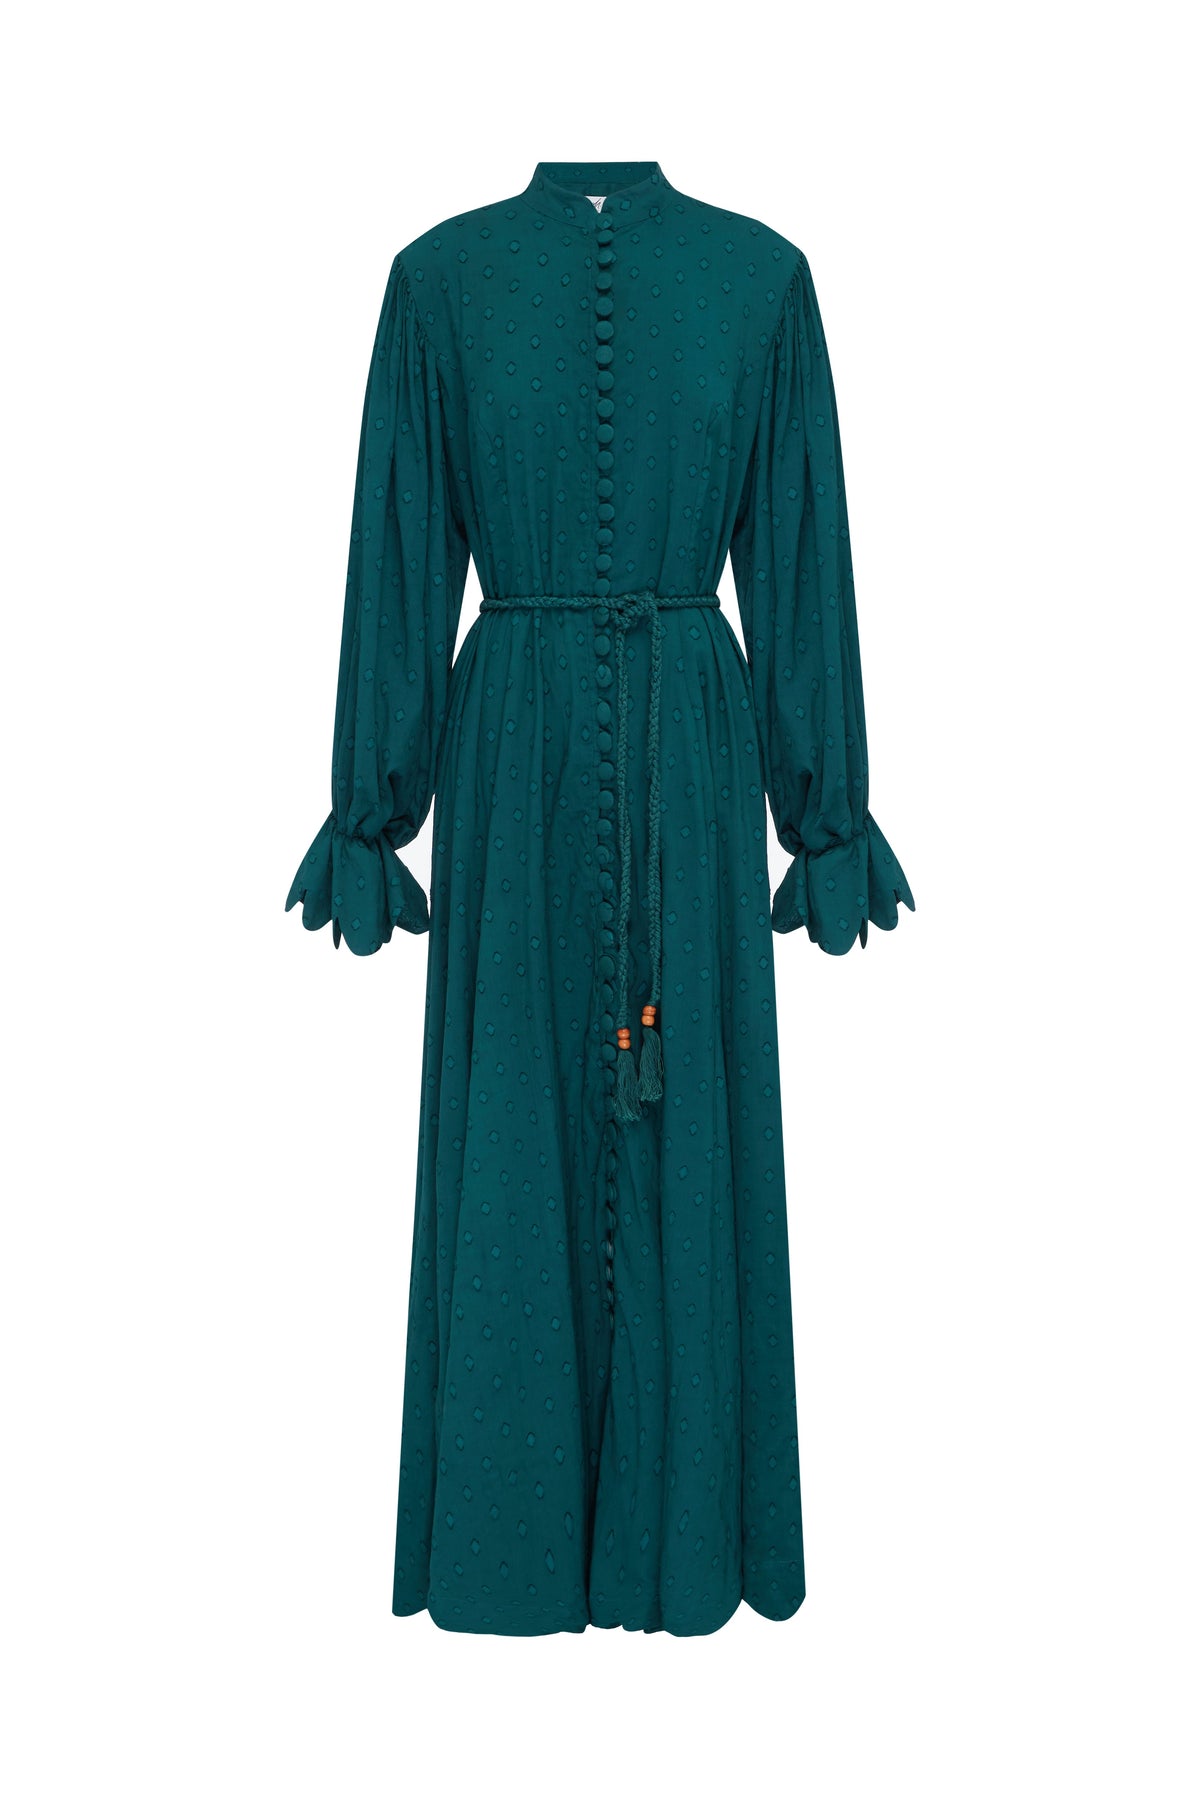 belted lightweight long sleeve maxi dress in teal